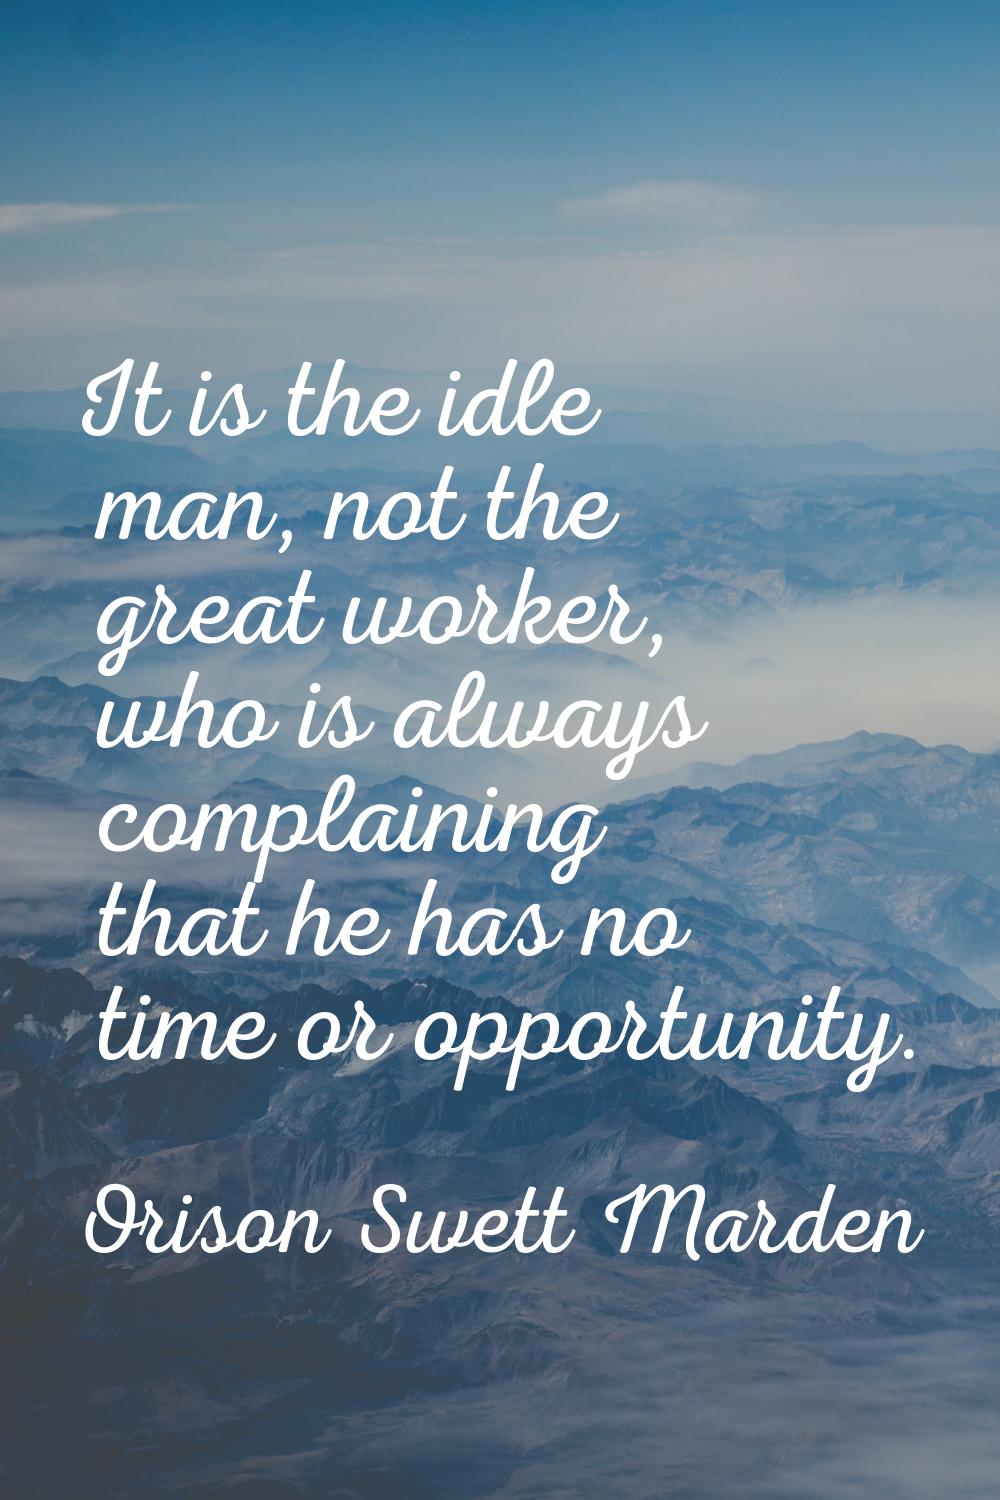 It is the idle man, not the great worker, who is always complaining that he has no time or opportun